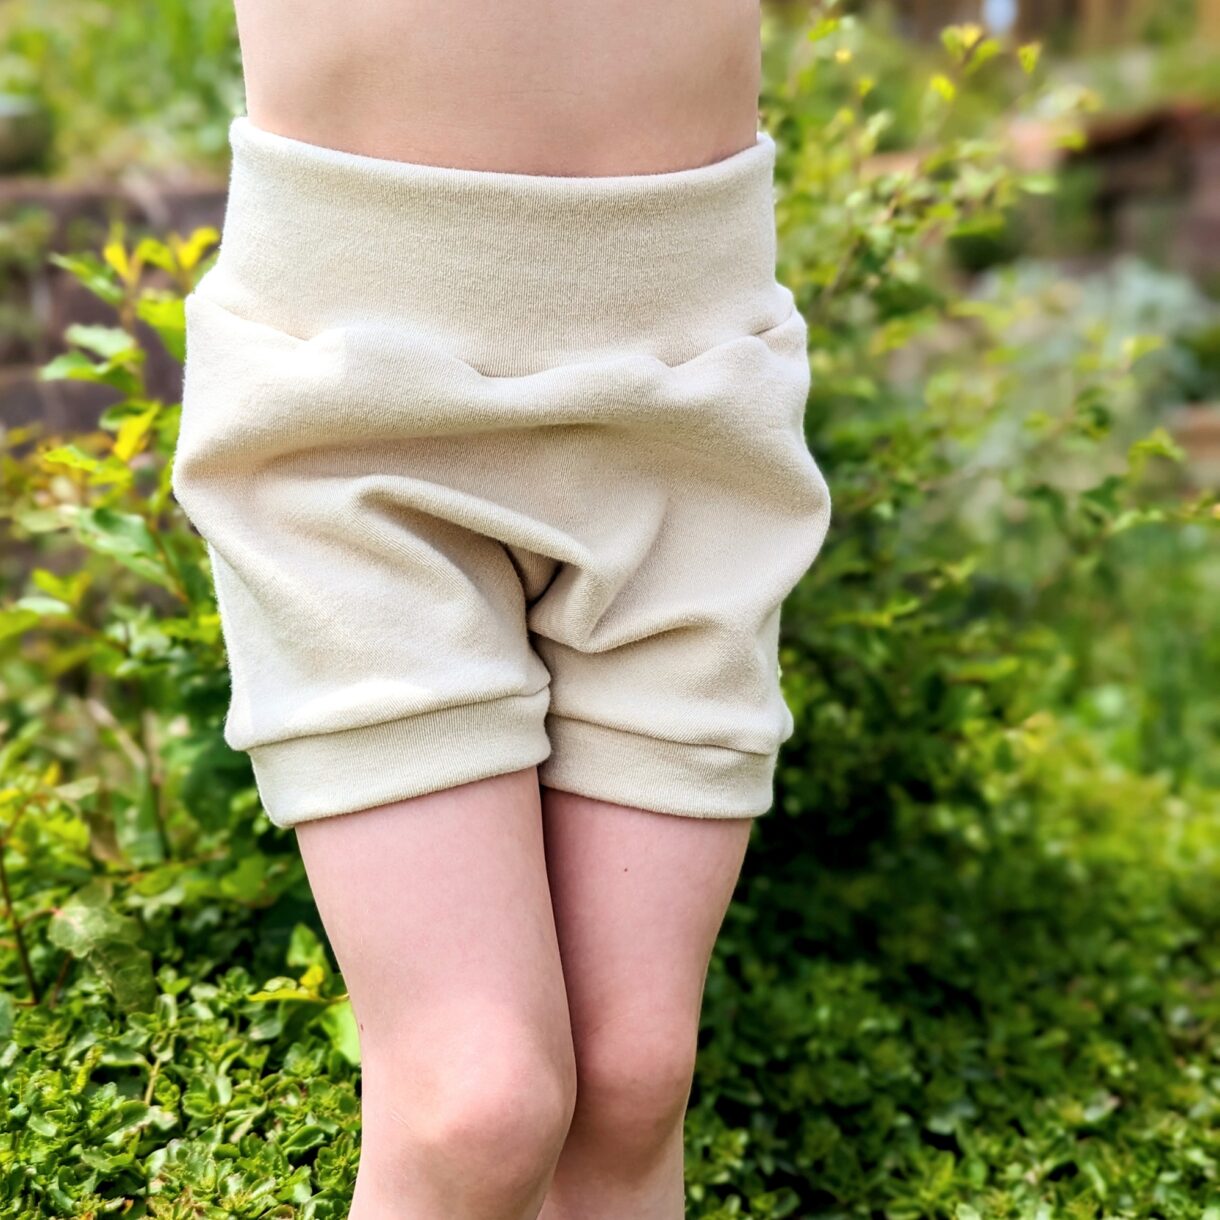 Merino Wool Shorties in Natural Cream showing front view giving added bulk to pair with cloth diapers or room for a looser fit article of clothing.